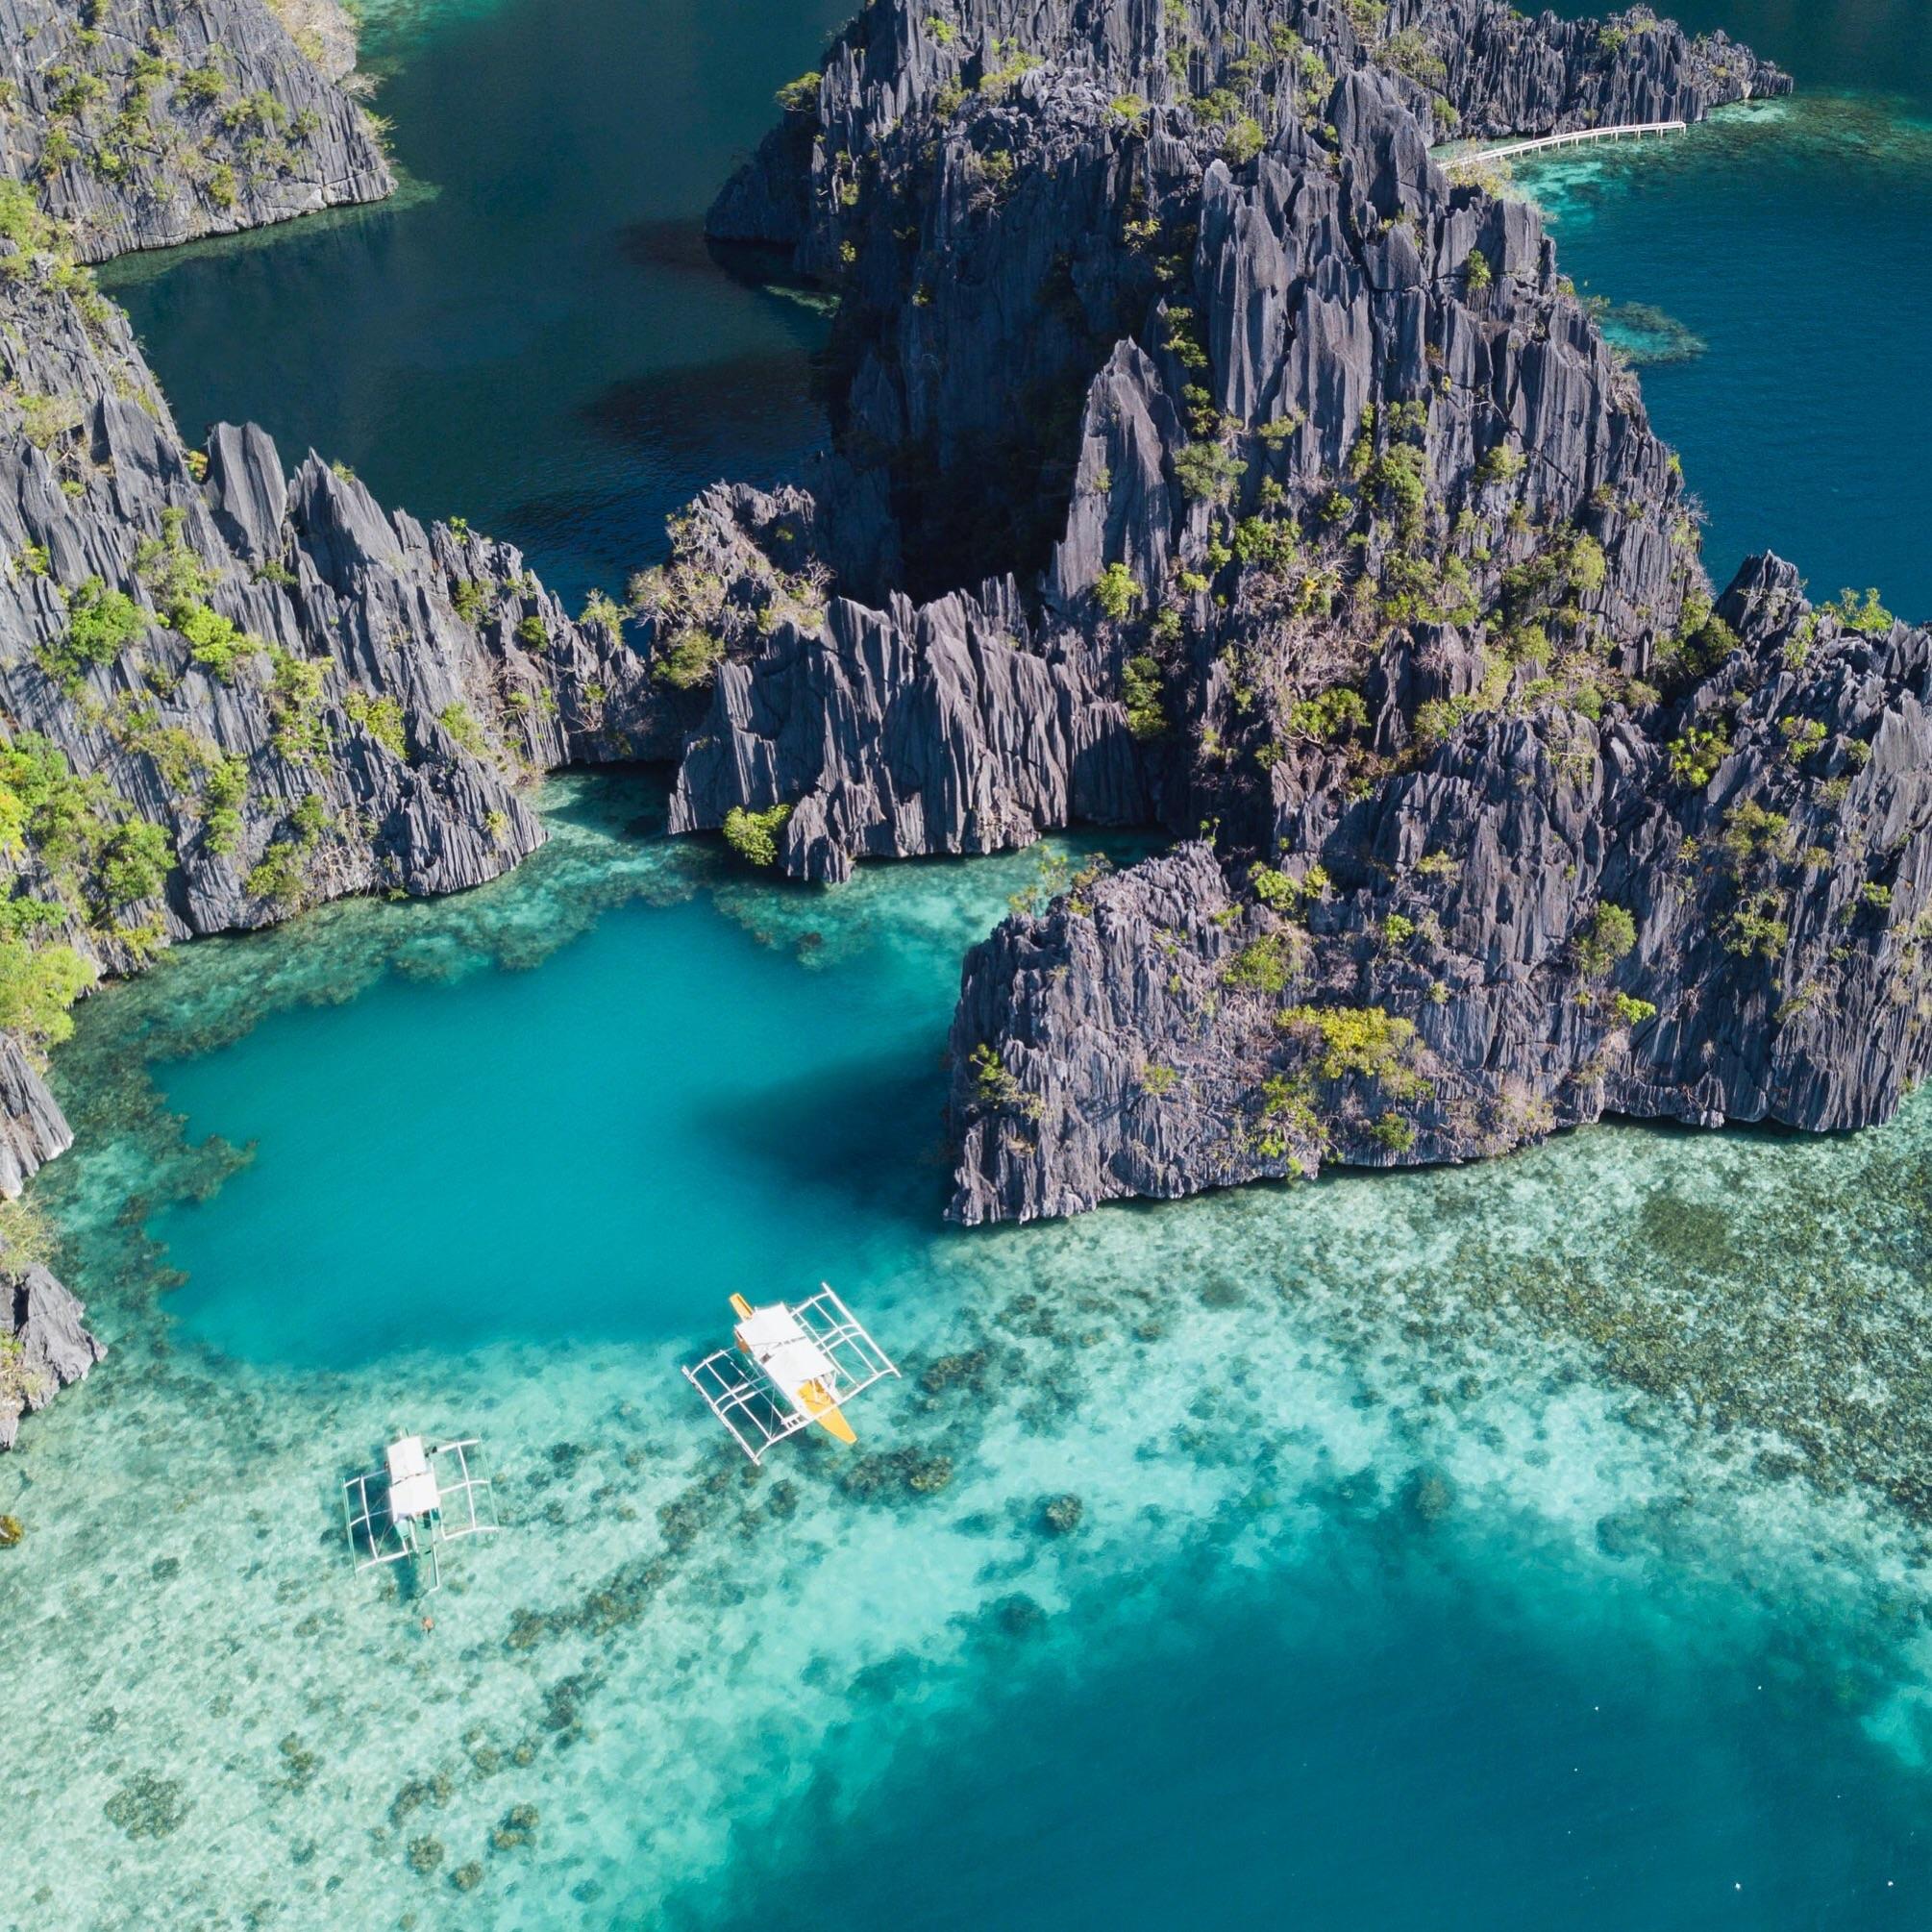 cheapest tour package in coron palawan